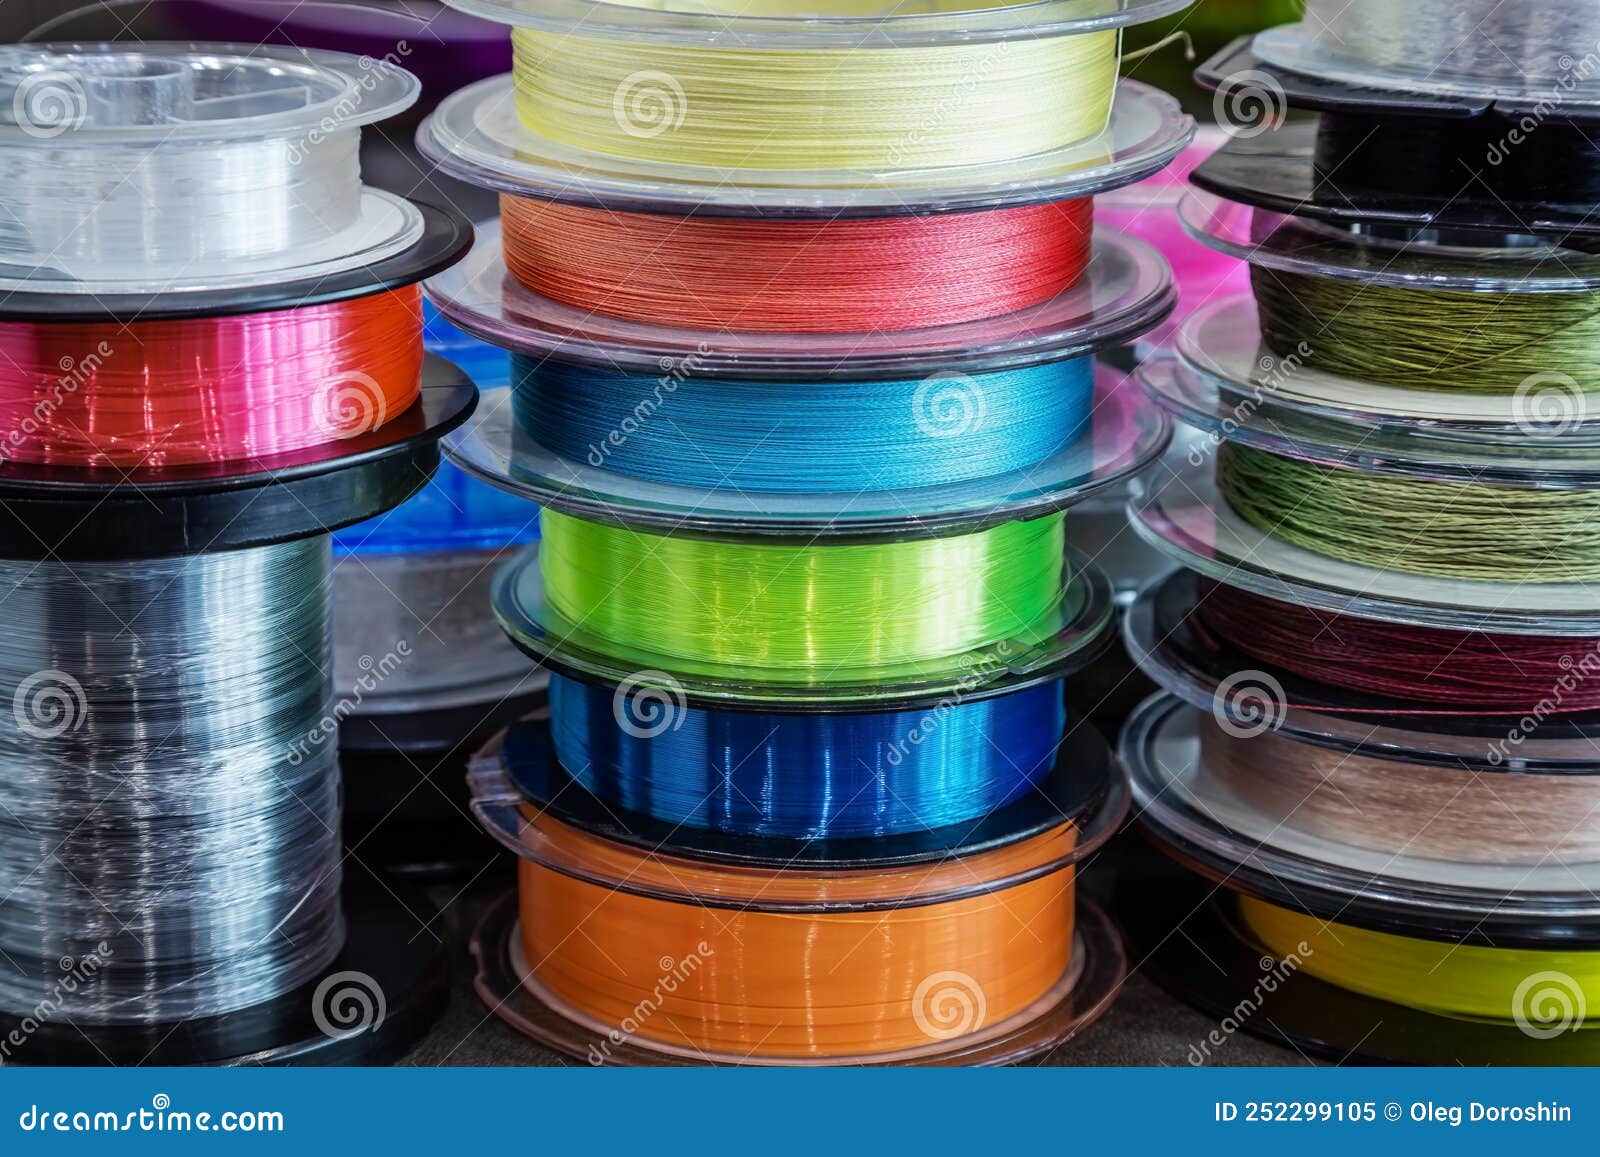 Different Types of Fishing Lines and Braided Cords in Fishing Reels Stock  Image - Image of fishing, braid: 252299105